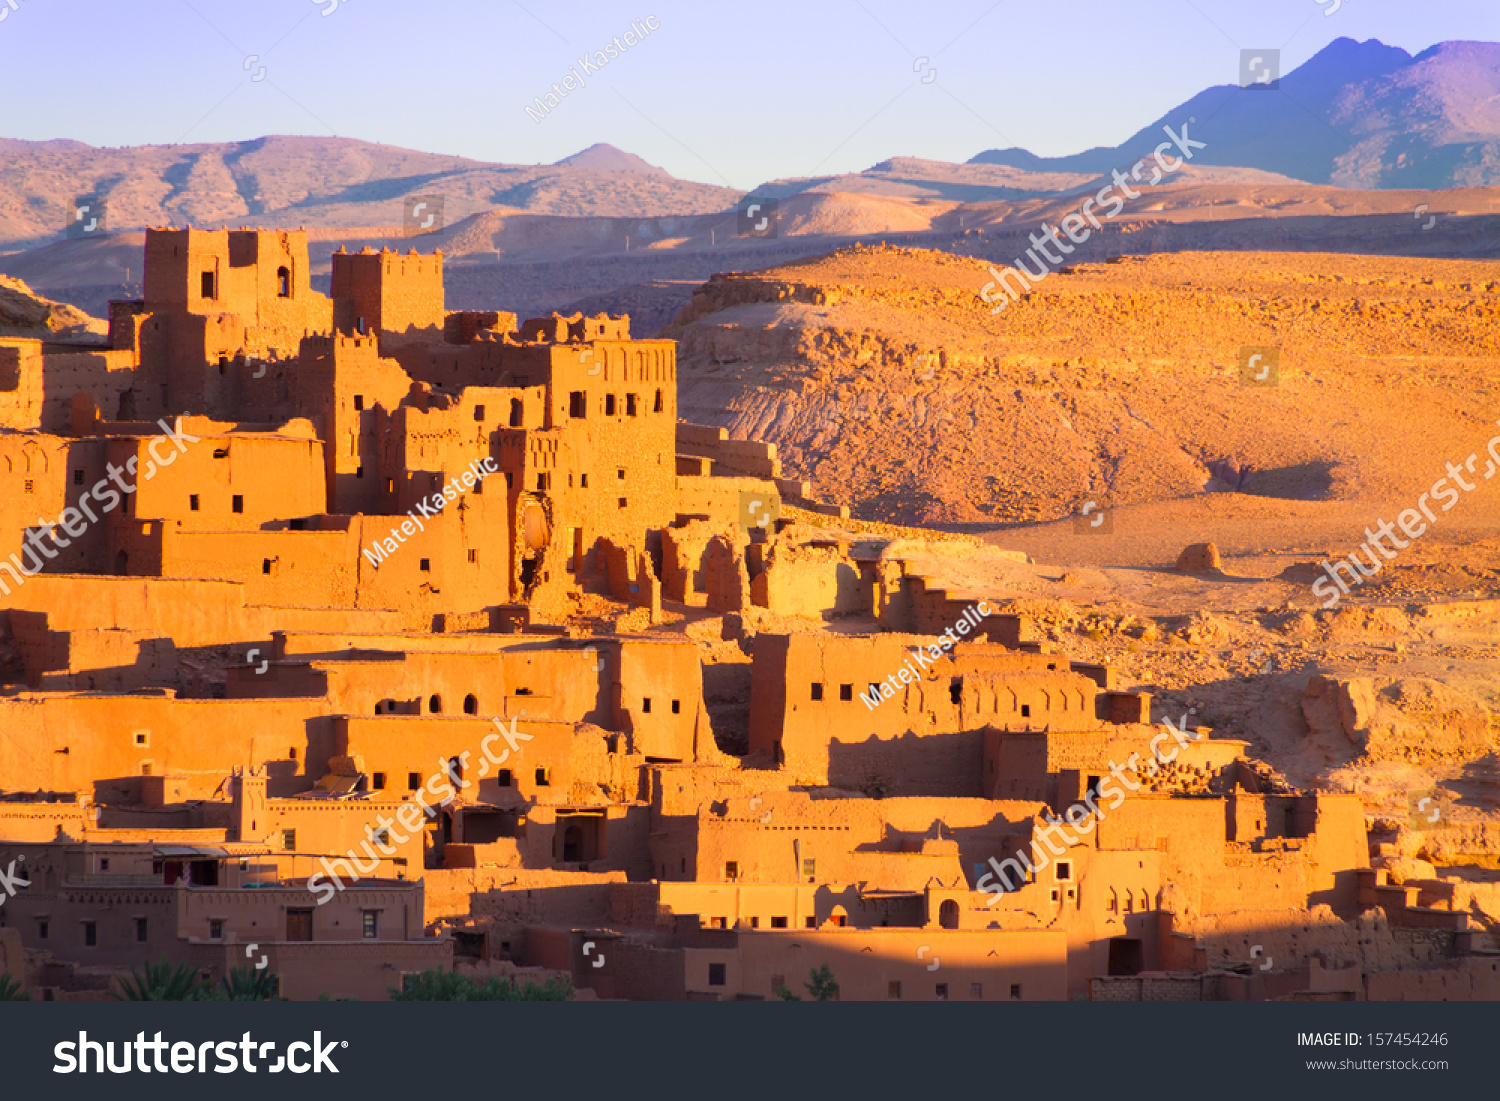 Ait Benhaddou,fortified city, kasbah or ksar, along the former caravan route between Sahara and Marrakesh in present day Morocco. It is situated in Souss Massa Draa on a hill along the Ounila River. #157454246